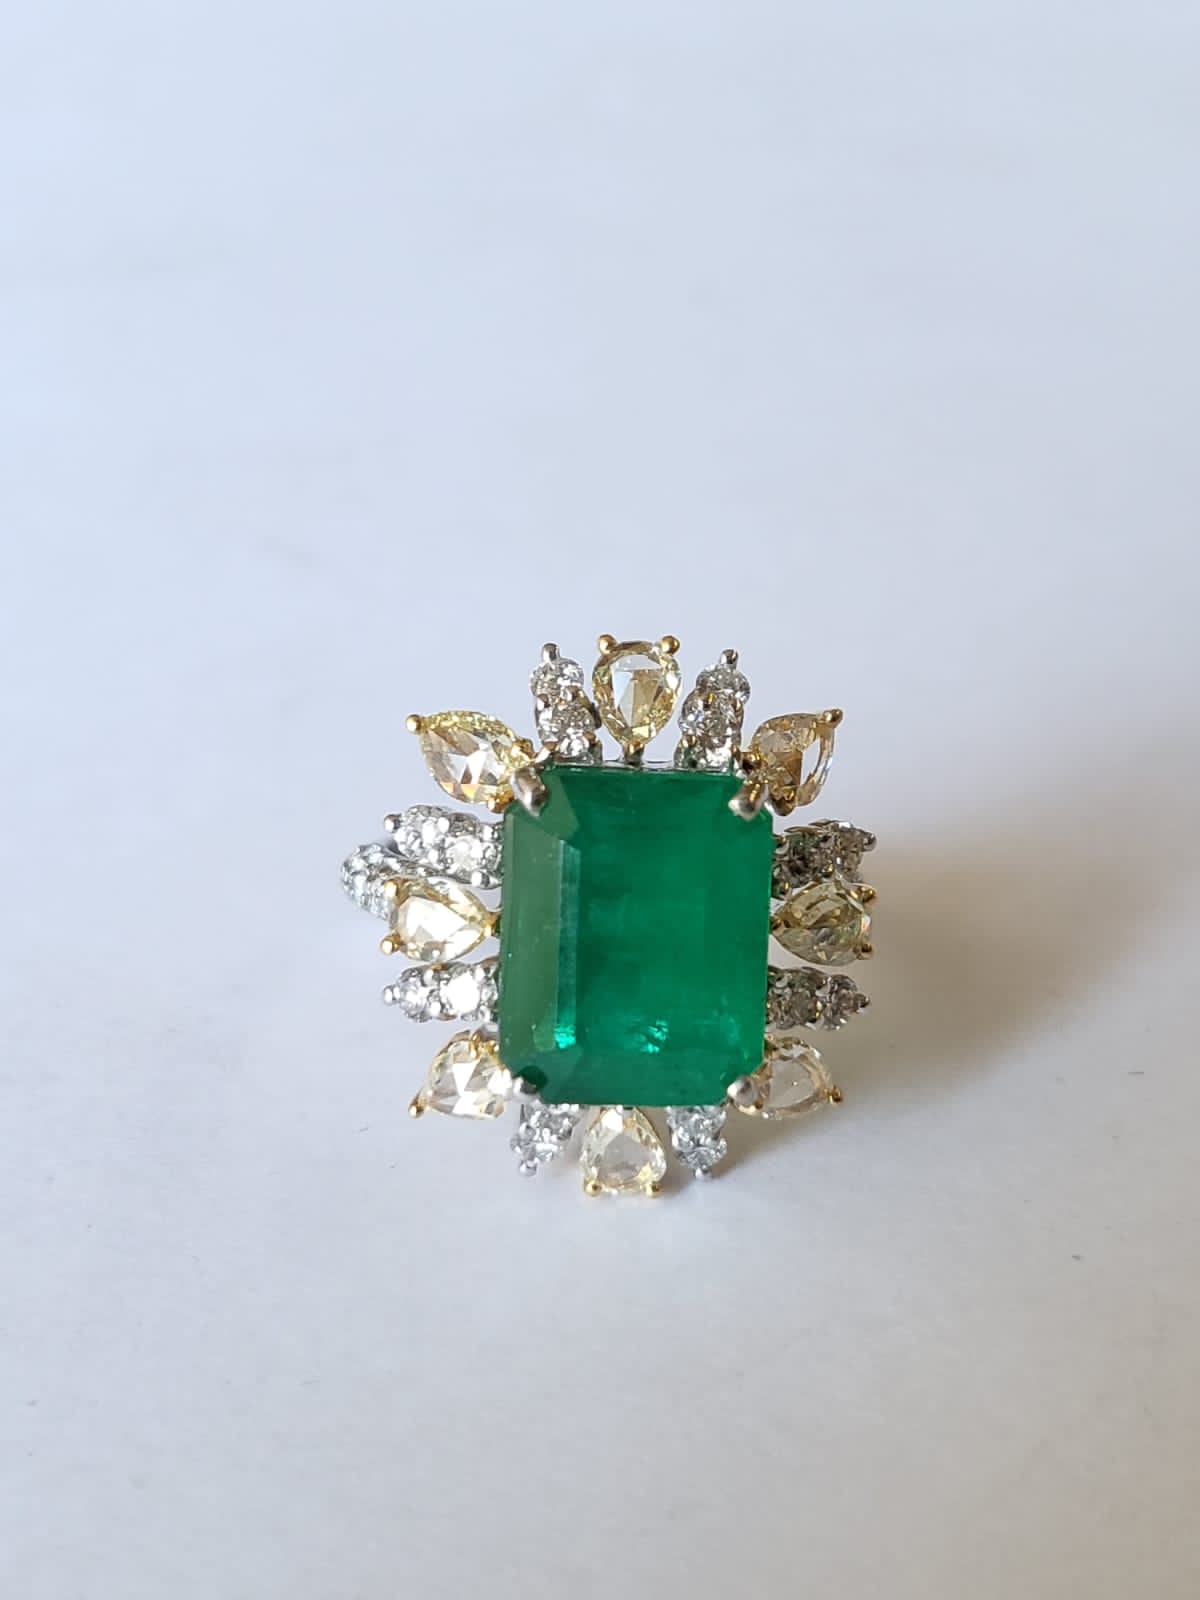 A very gorgeous and beautiful, Emerald Engagement Ring set in 18K White Gold & Diamonds. The weight of the Emerald is 5.52 carats. The Emerald is completely natural, without any treatment and is of Zambian origin. The weight of the Rose Cut Diamonds